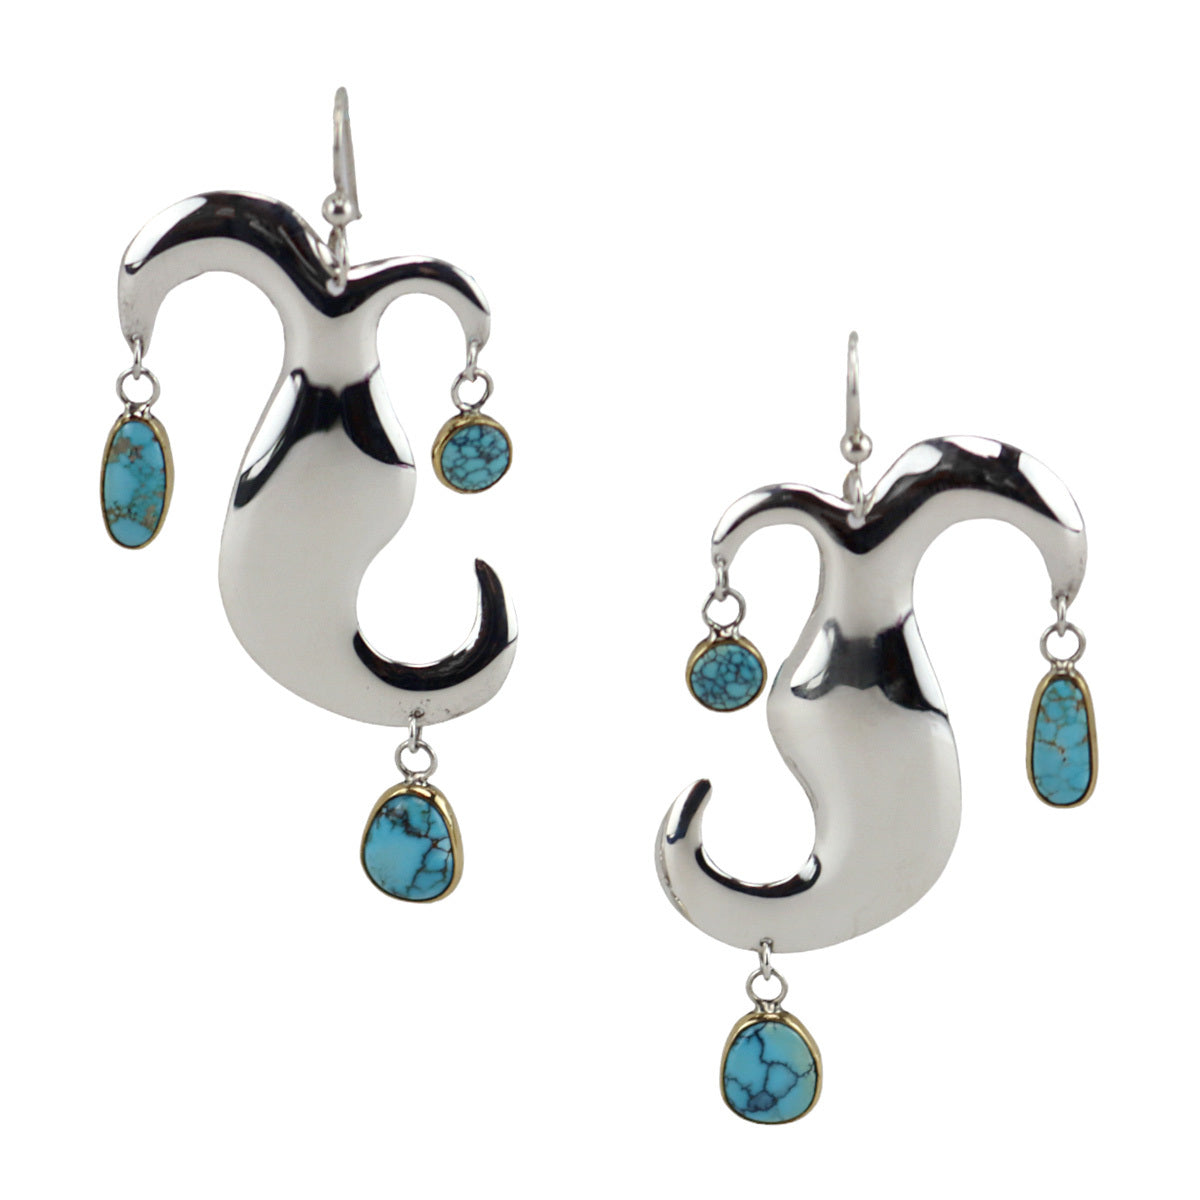 Sam Patania - "Jester Earrings" with Number 8 Turquoise, 18K Gold, and Sterling Silver, 1.75" x 1.5" (J91699-1123-009)